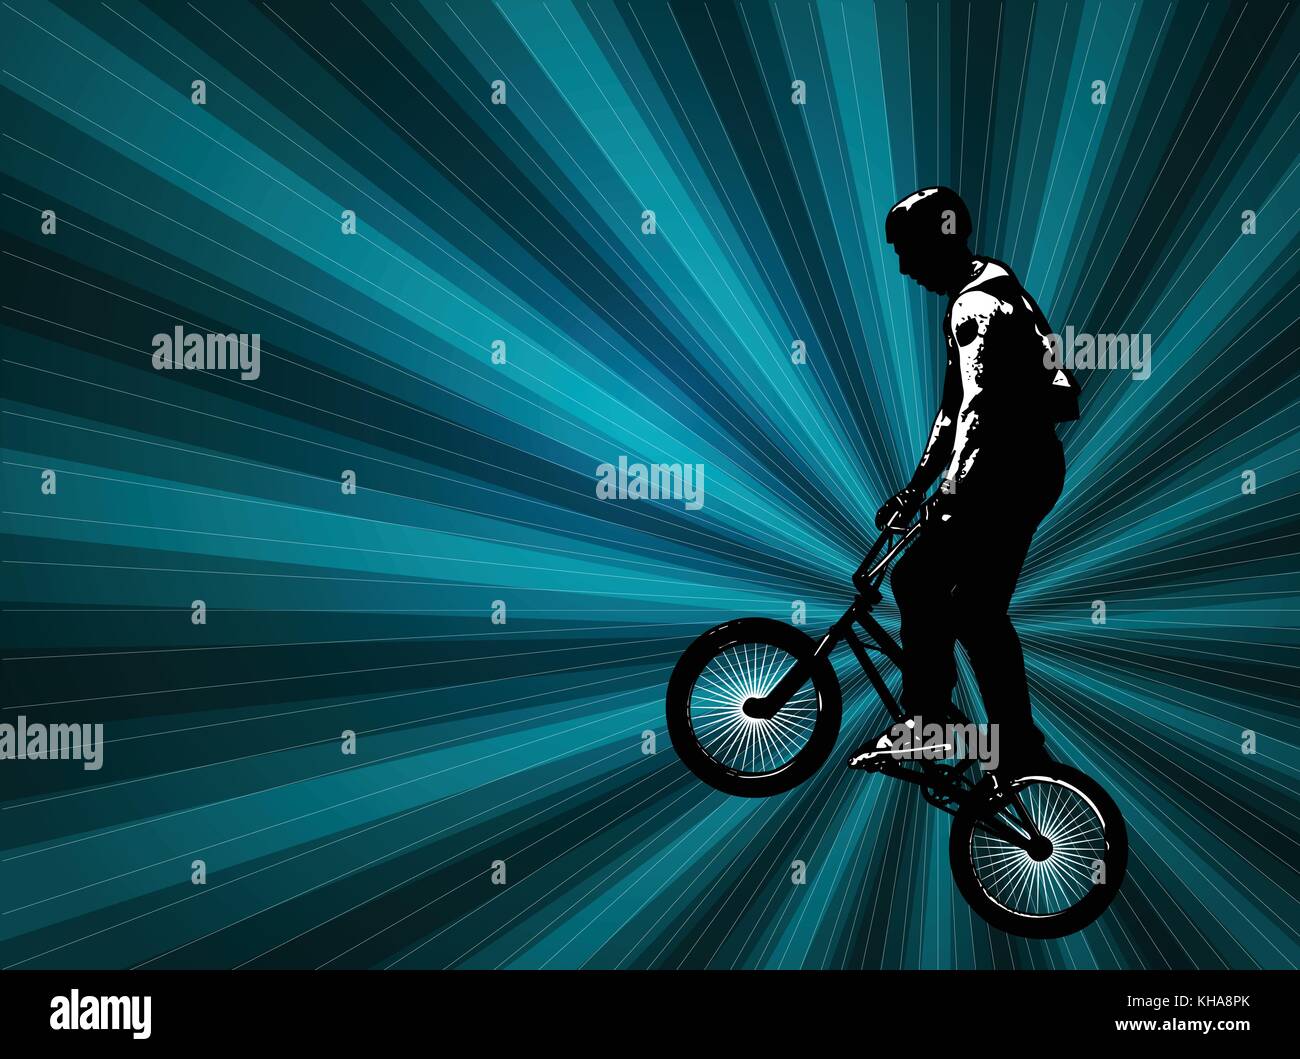 bmx stunt cyclist on the abstract background - vector Stock Vector